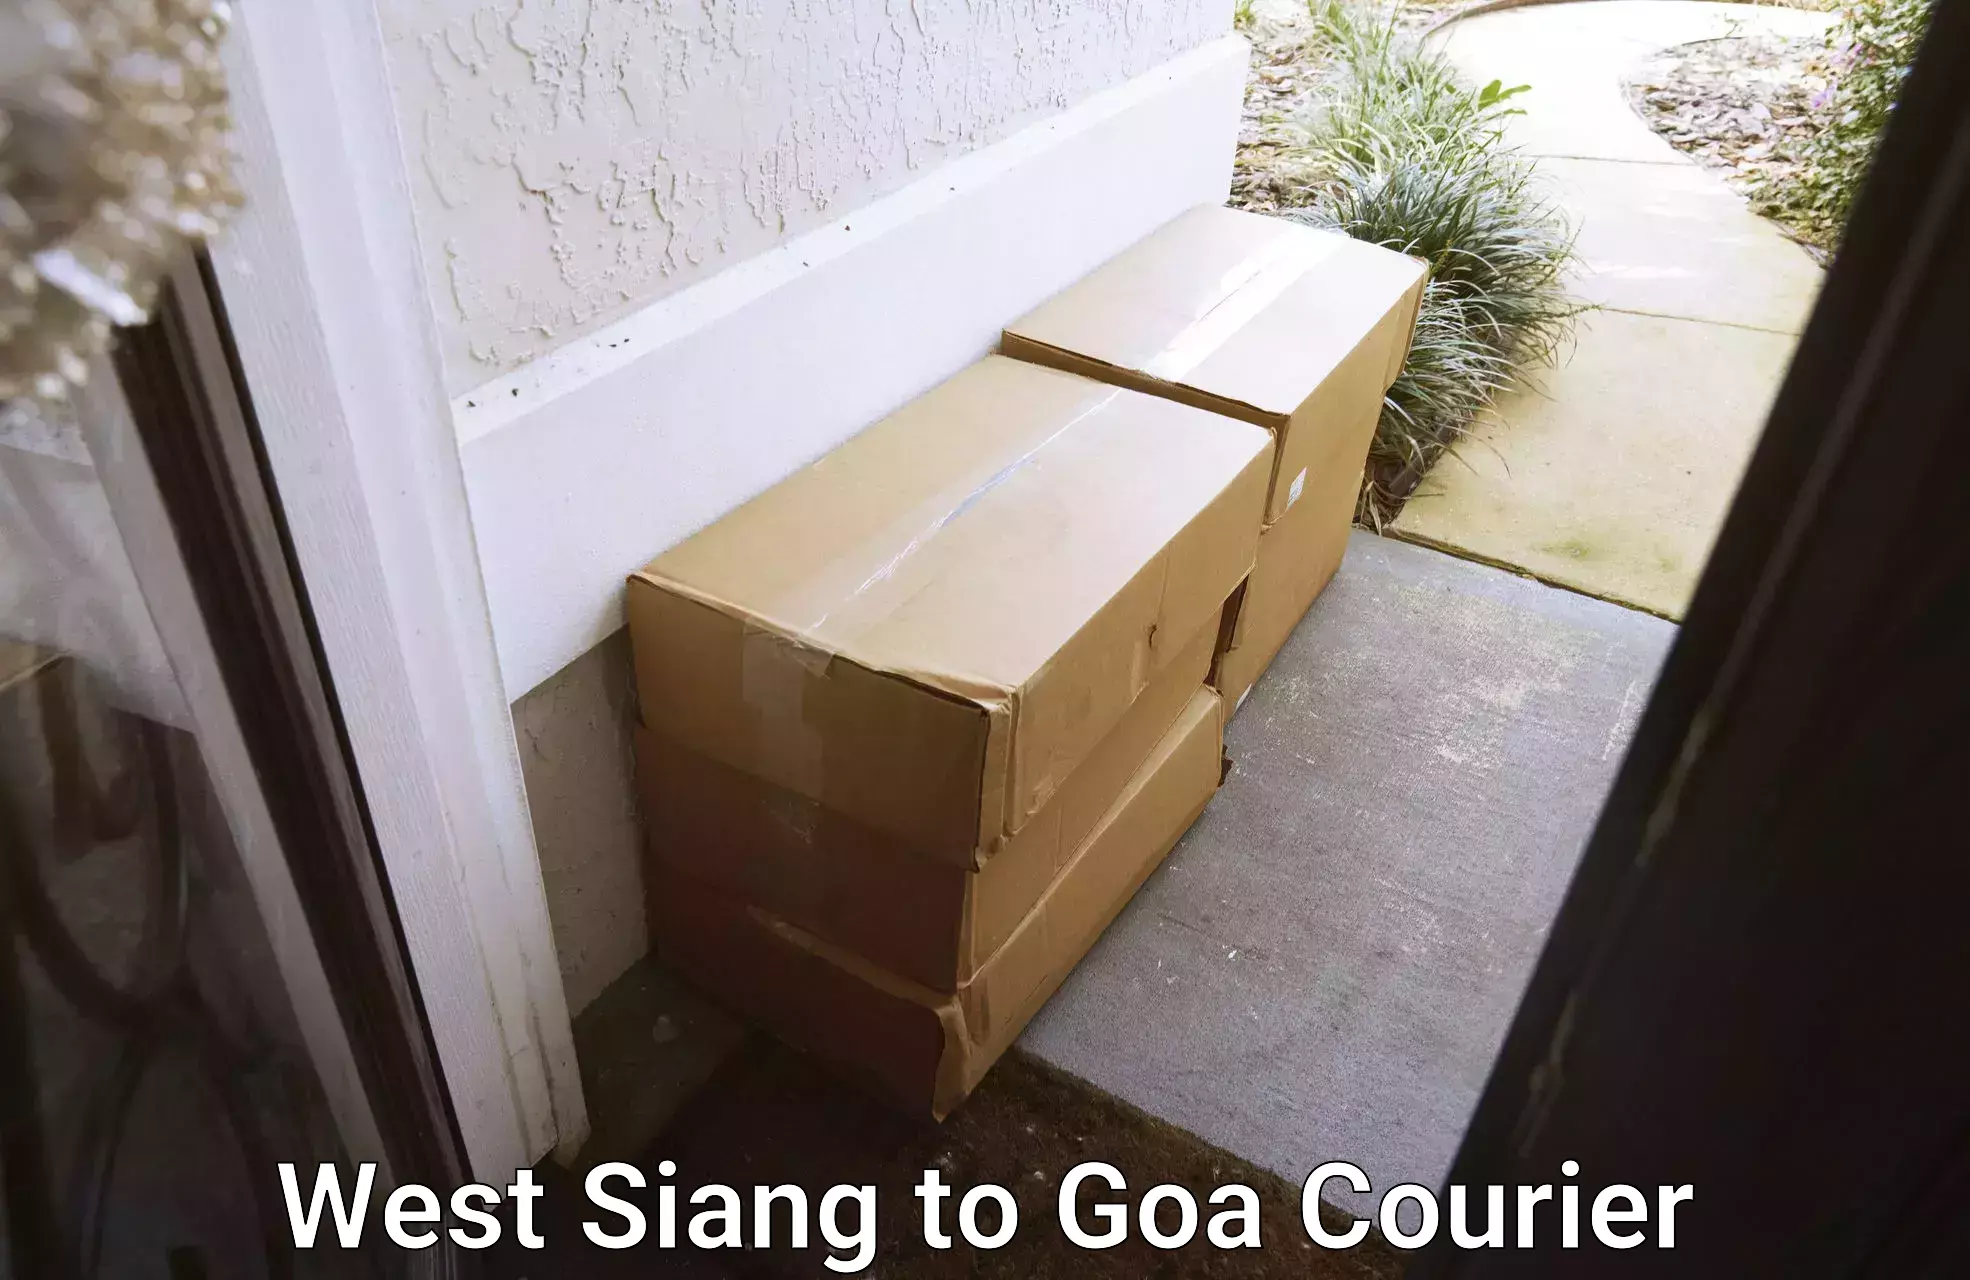 Advanced courier platforms West Siang to South Goa